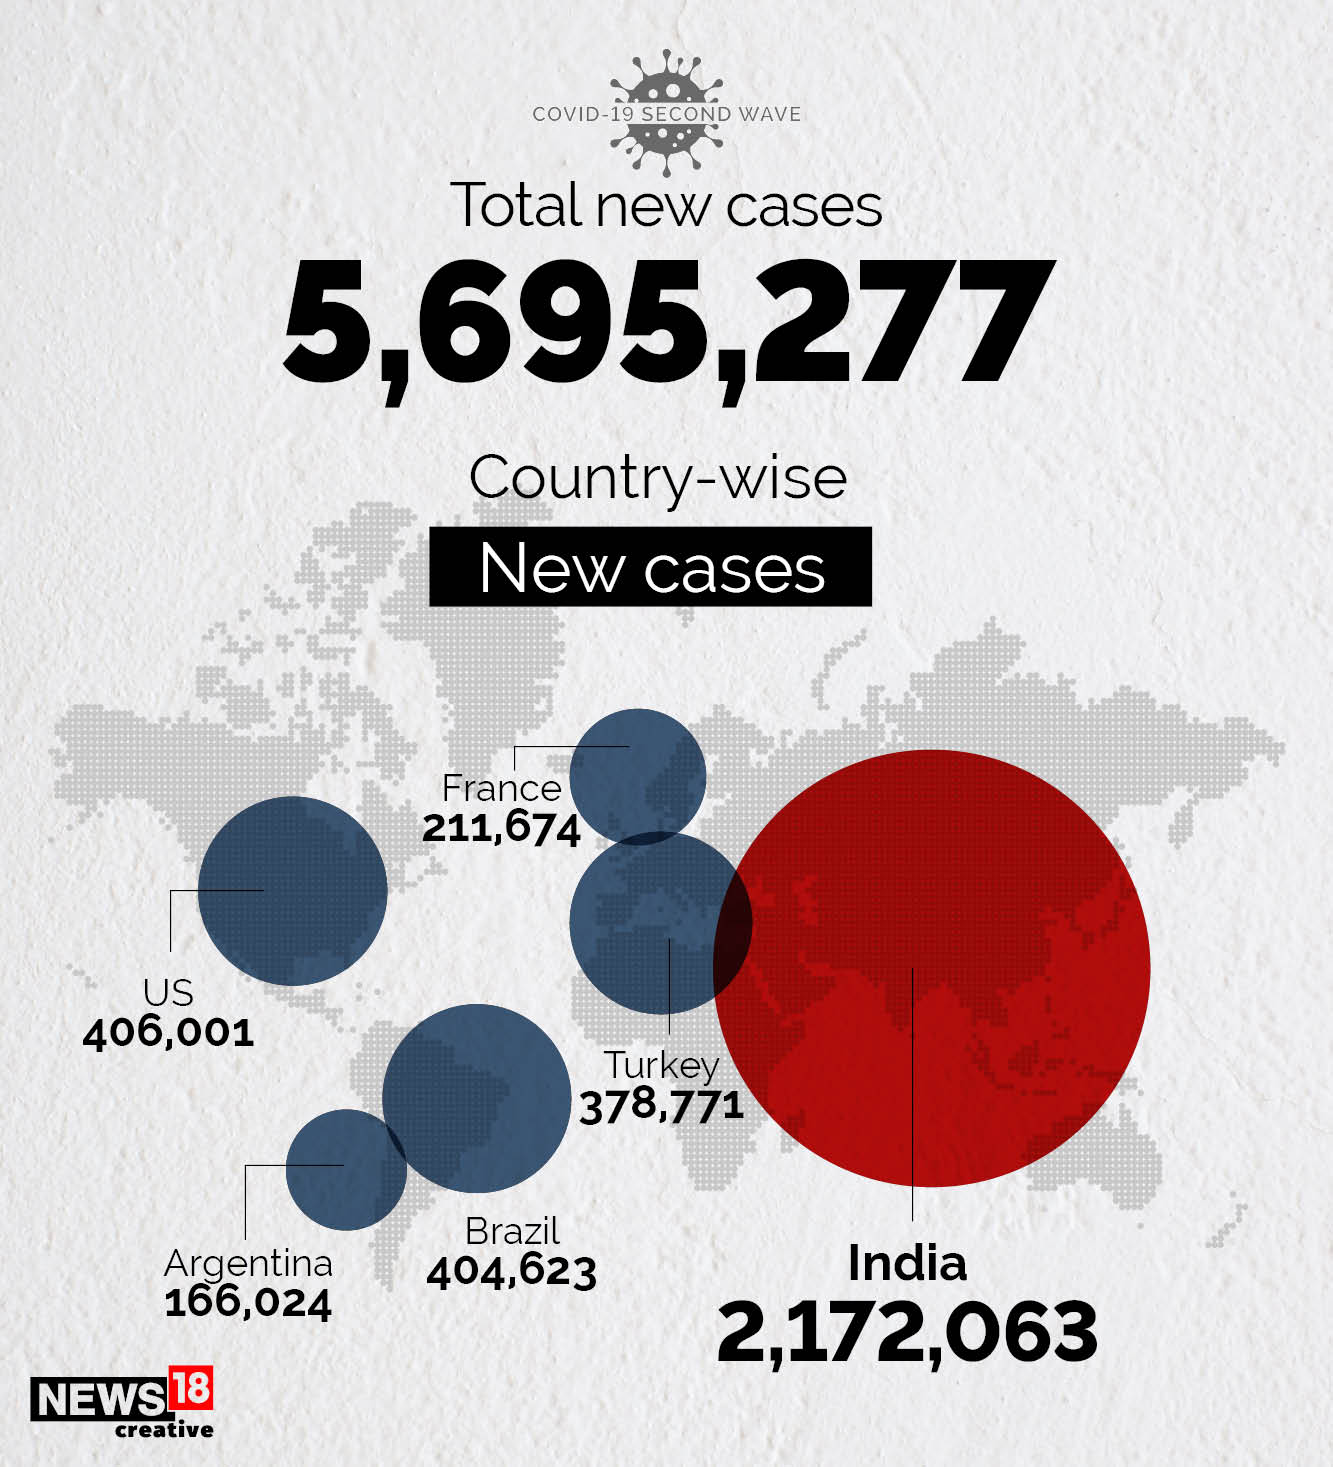 India adds 2 million-plus new cases in seven days